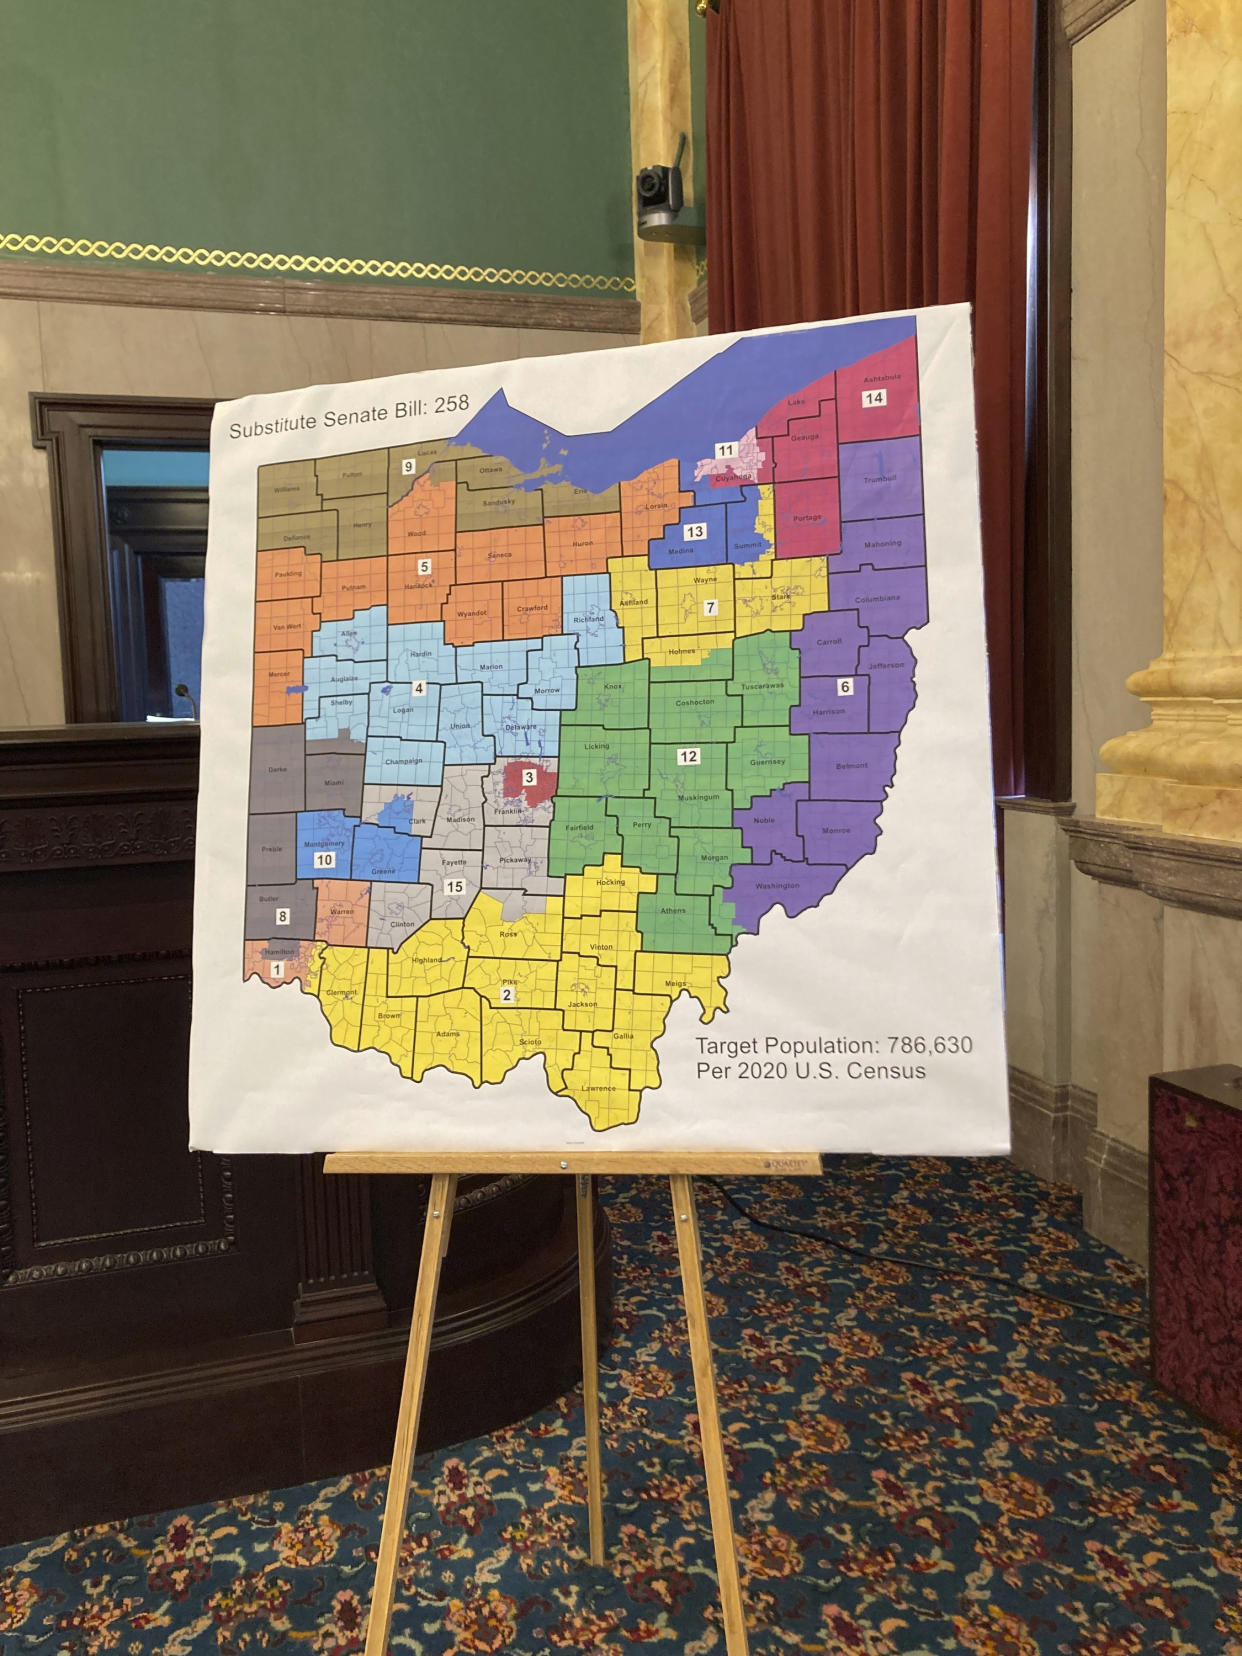 FILE—A map of Ohio congressional districts sits on display during a committee hearing at the Ohio Statehouse in Columbus, Ohio in this file photo from Nov. 16, 2021. On Friday, Jan. 14, 2022, the Ohio Supreme Court rejected a new map of the state's 15 congressional districts as gerrymandered, sending the blueprint back for another try. The 4-3 decision returns the process to the powerful Ohio Redistricting Commission. (AP Photo/Julie Carr Smyth, File)